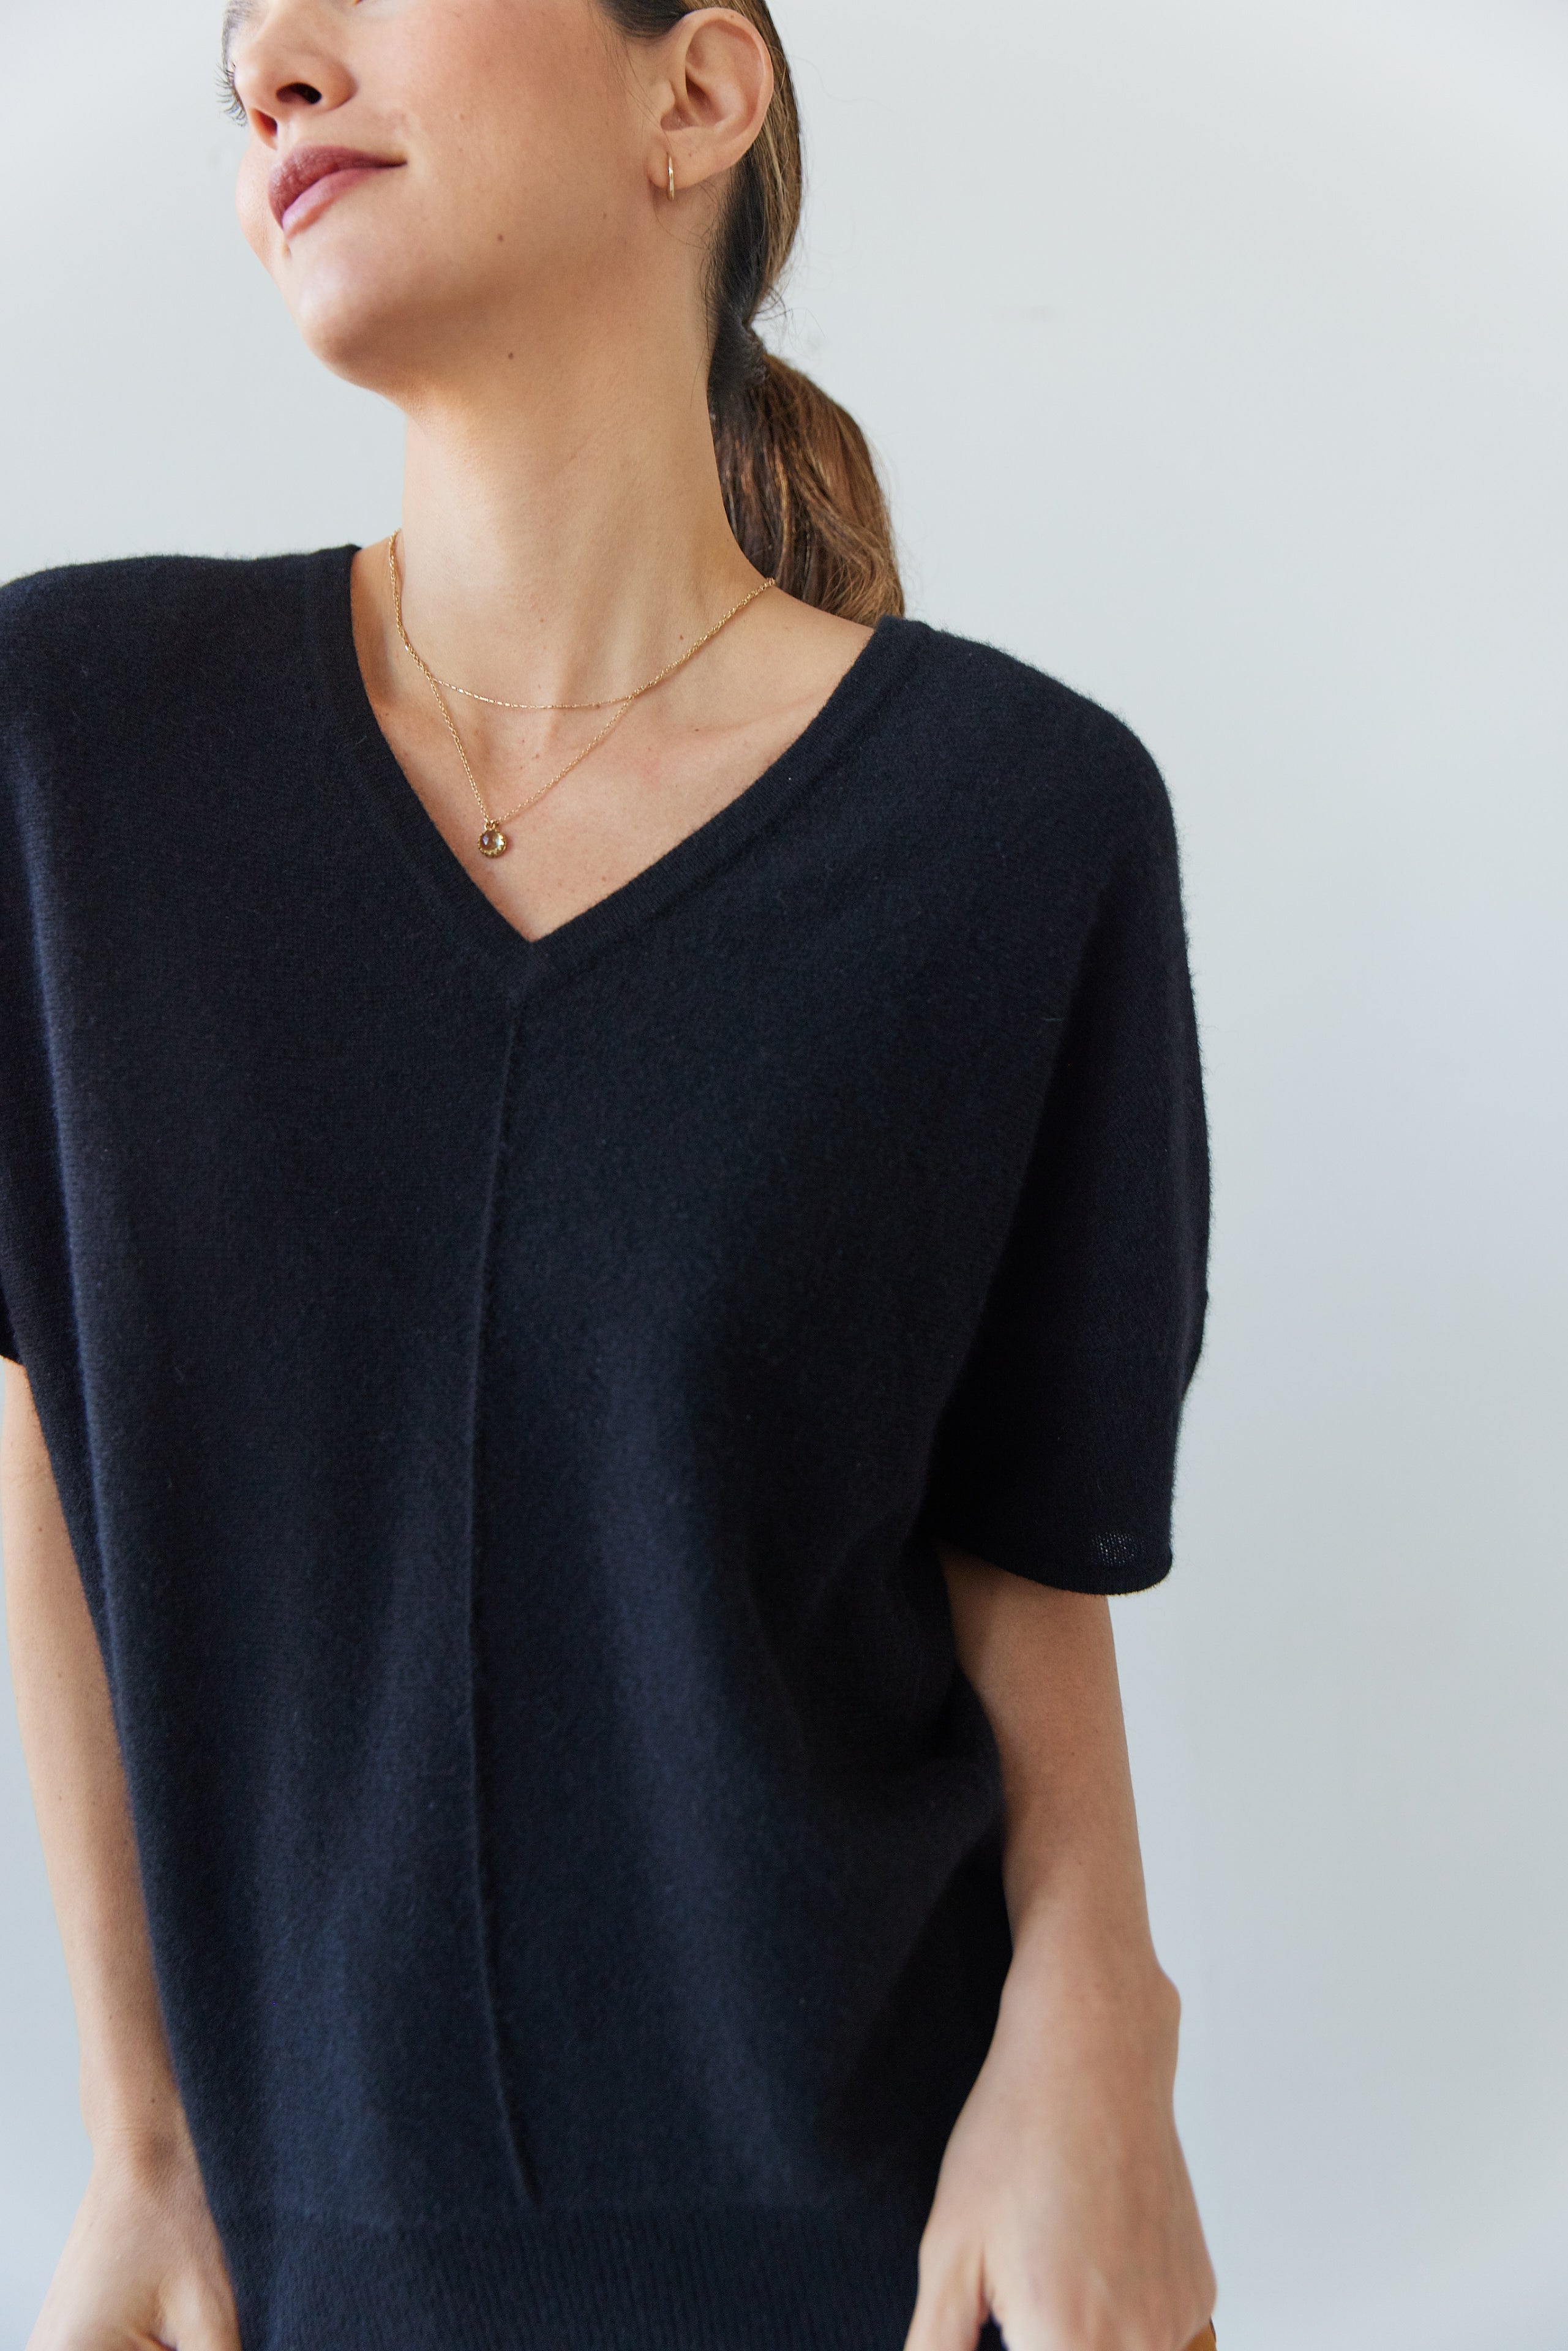 The Cashmere Shell